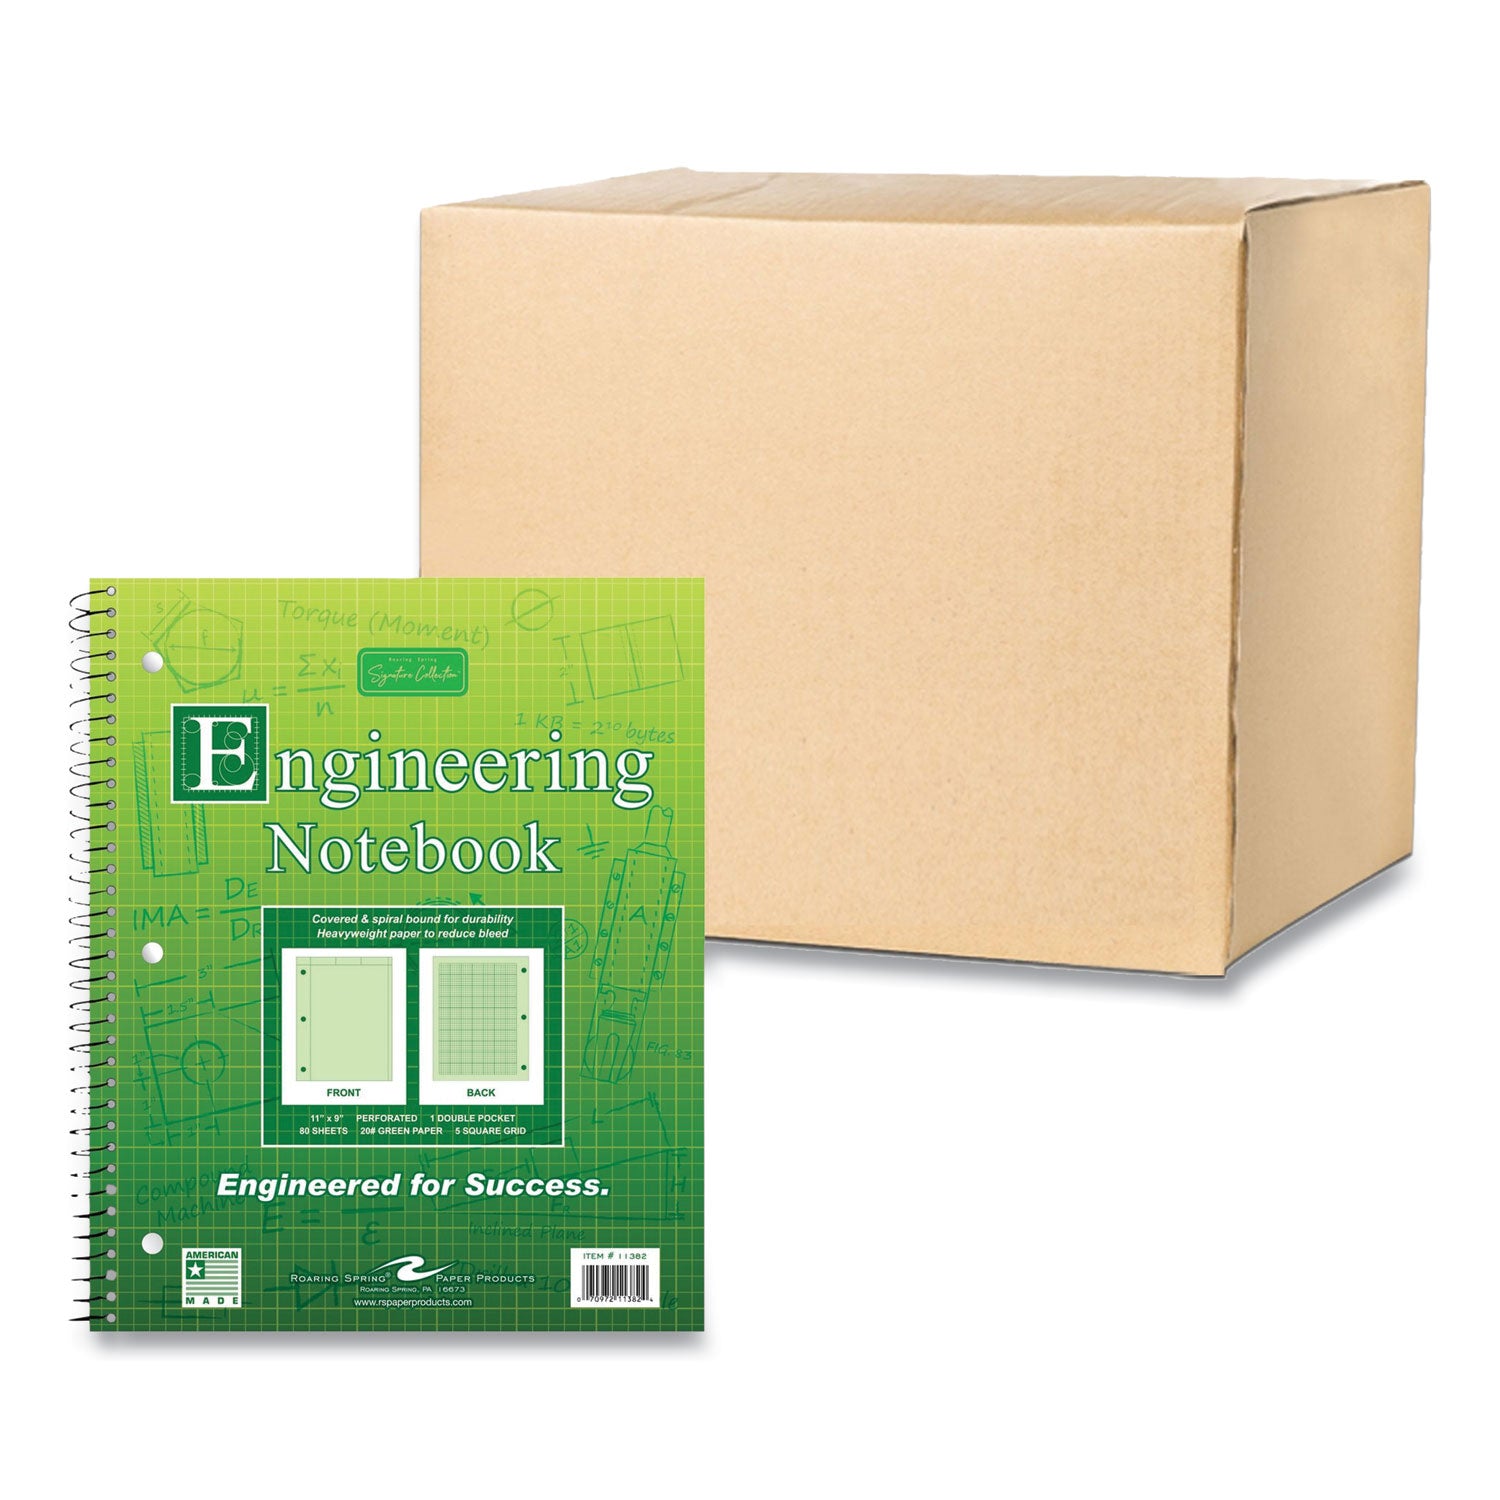 wirebound-engineering-notebook-20-lb-paper-stock-green-cover-80-green-11-x-85-sheets-24-ct-ships-in-4-6-business-days_roa11382cs - 3